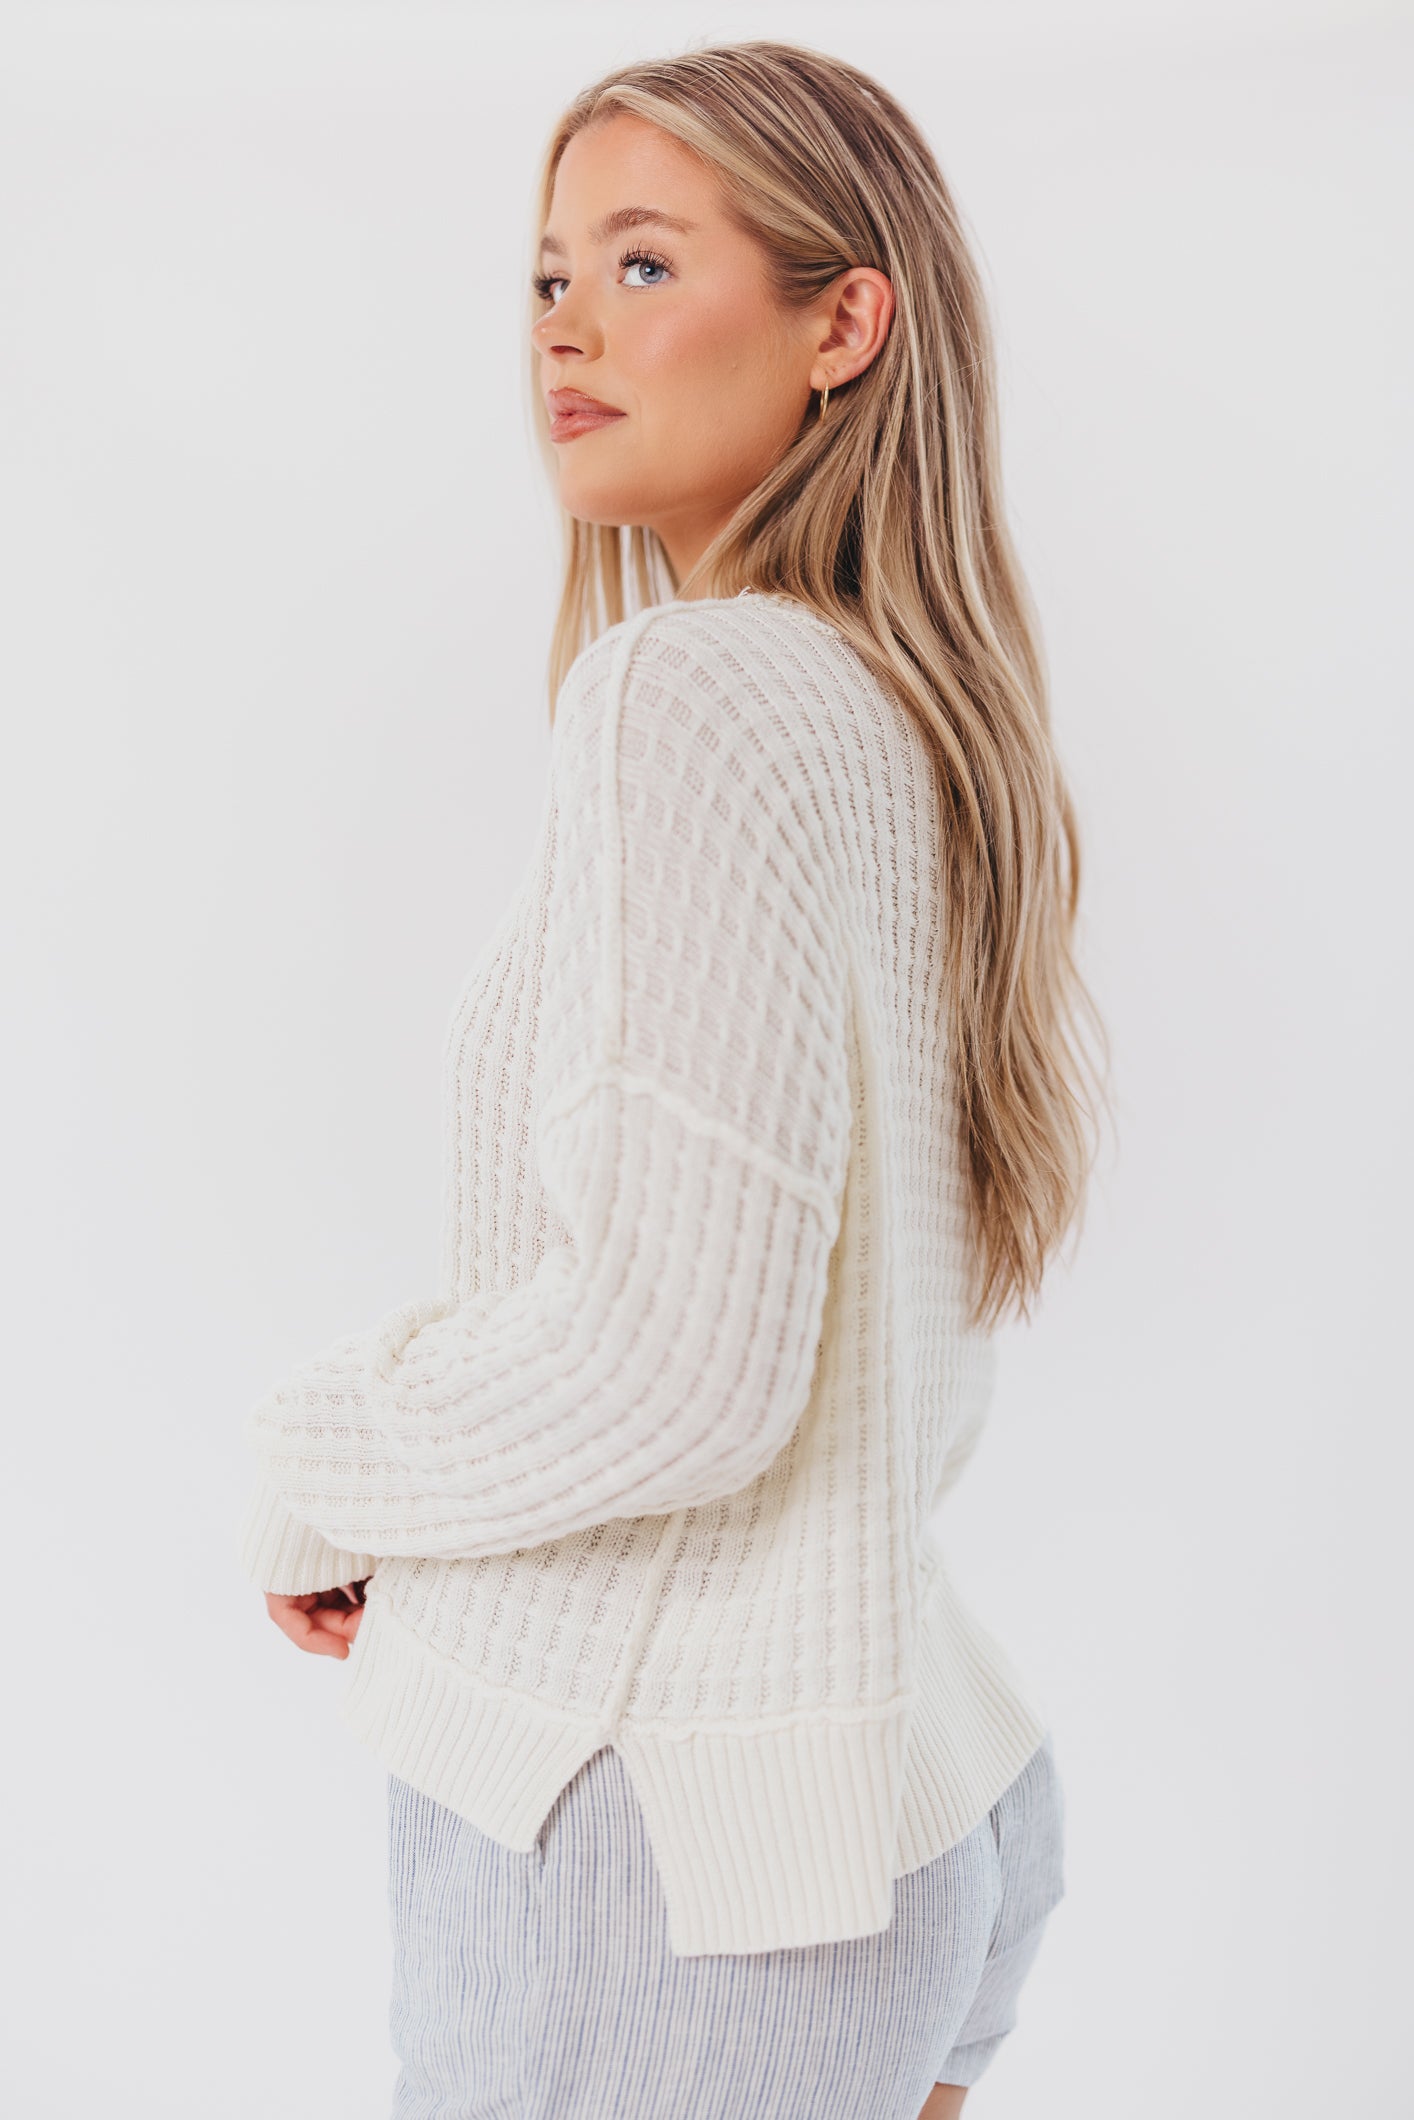 Baylor Pullover in Ivory